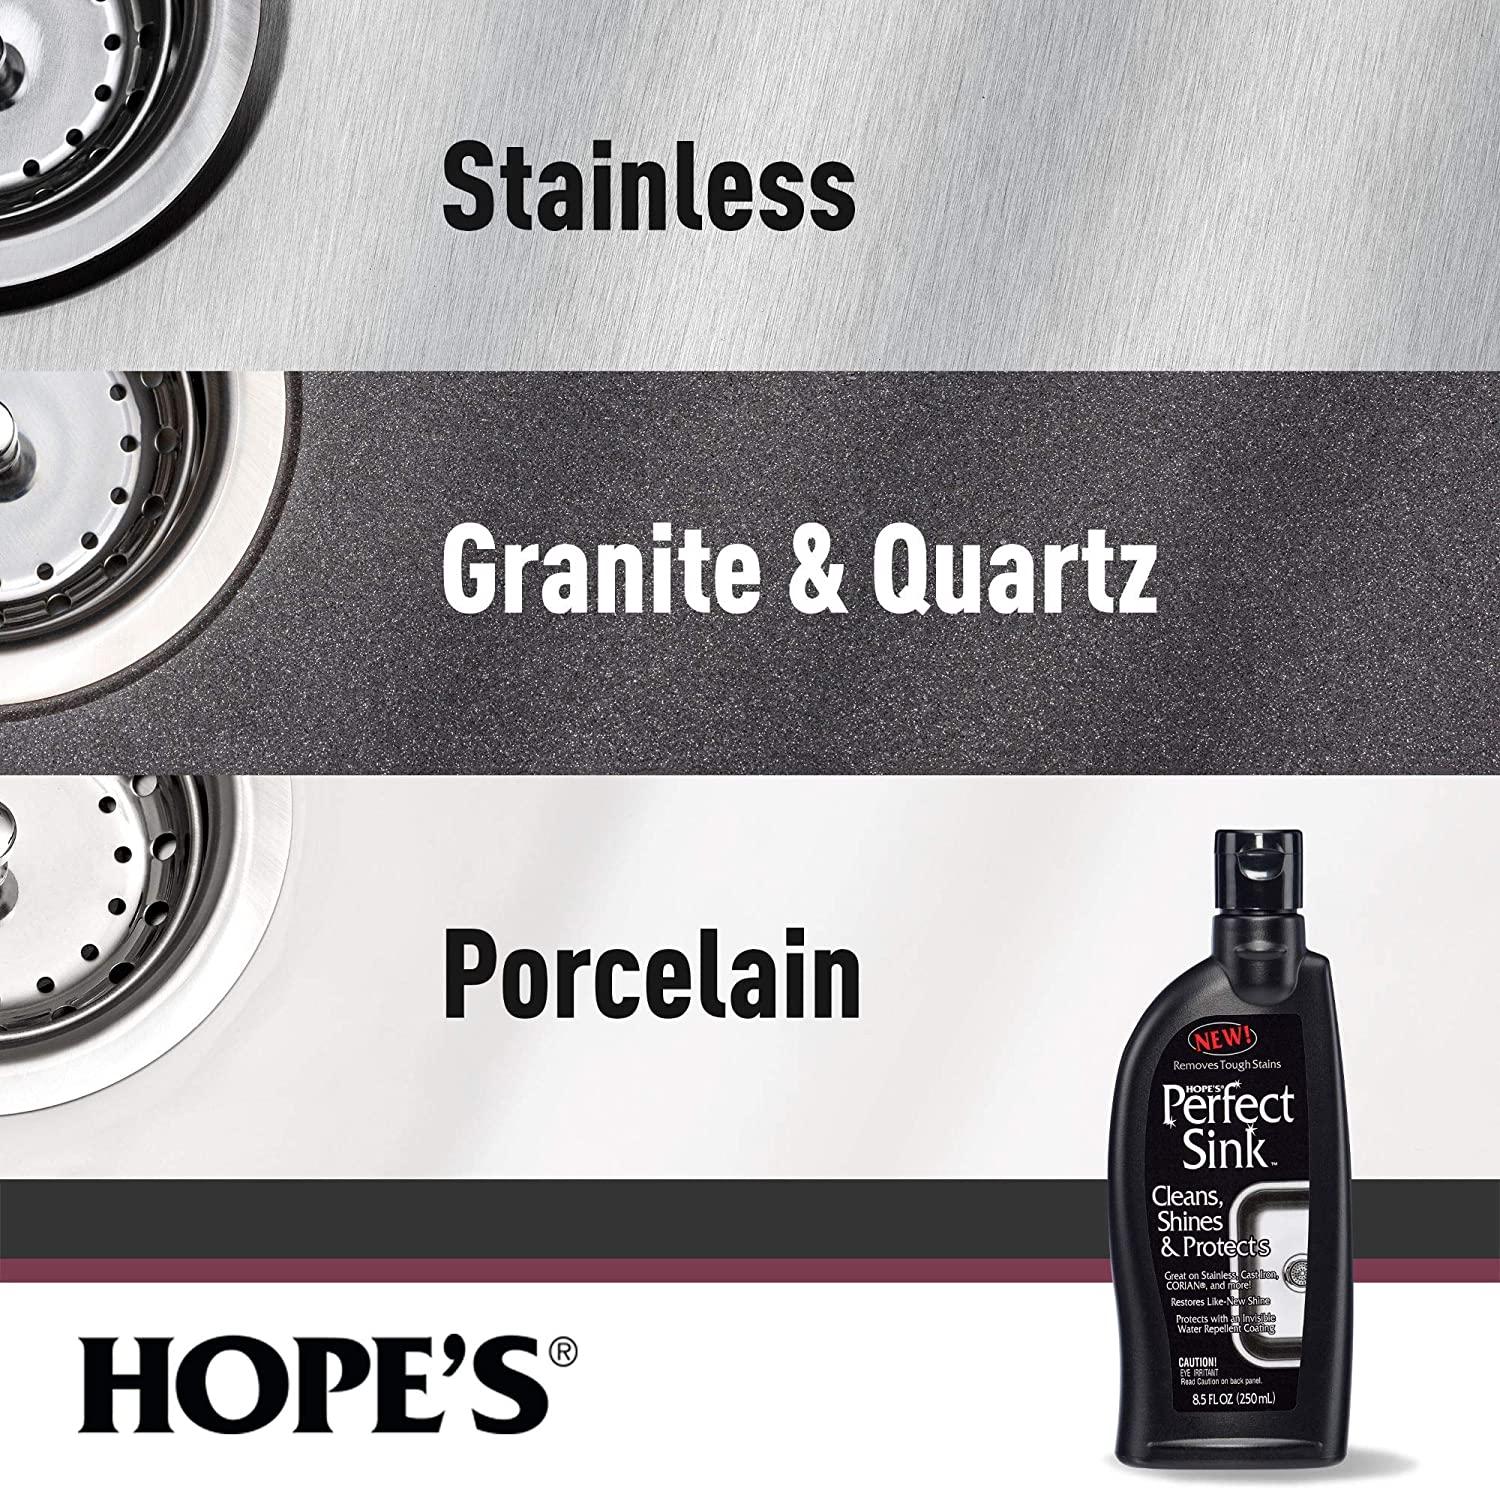 HOPE'S Perfect Sink Cleaner Polish Protect Stainless STEEL